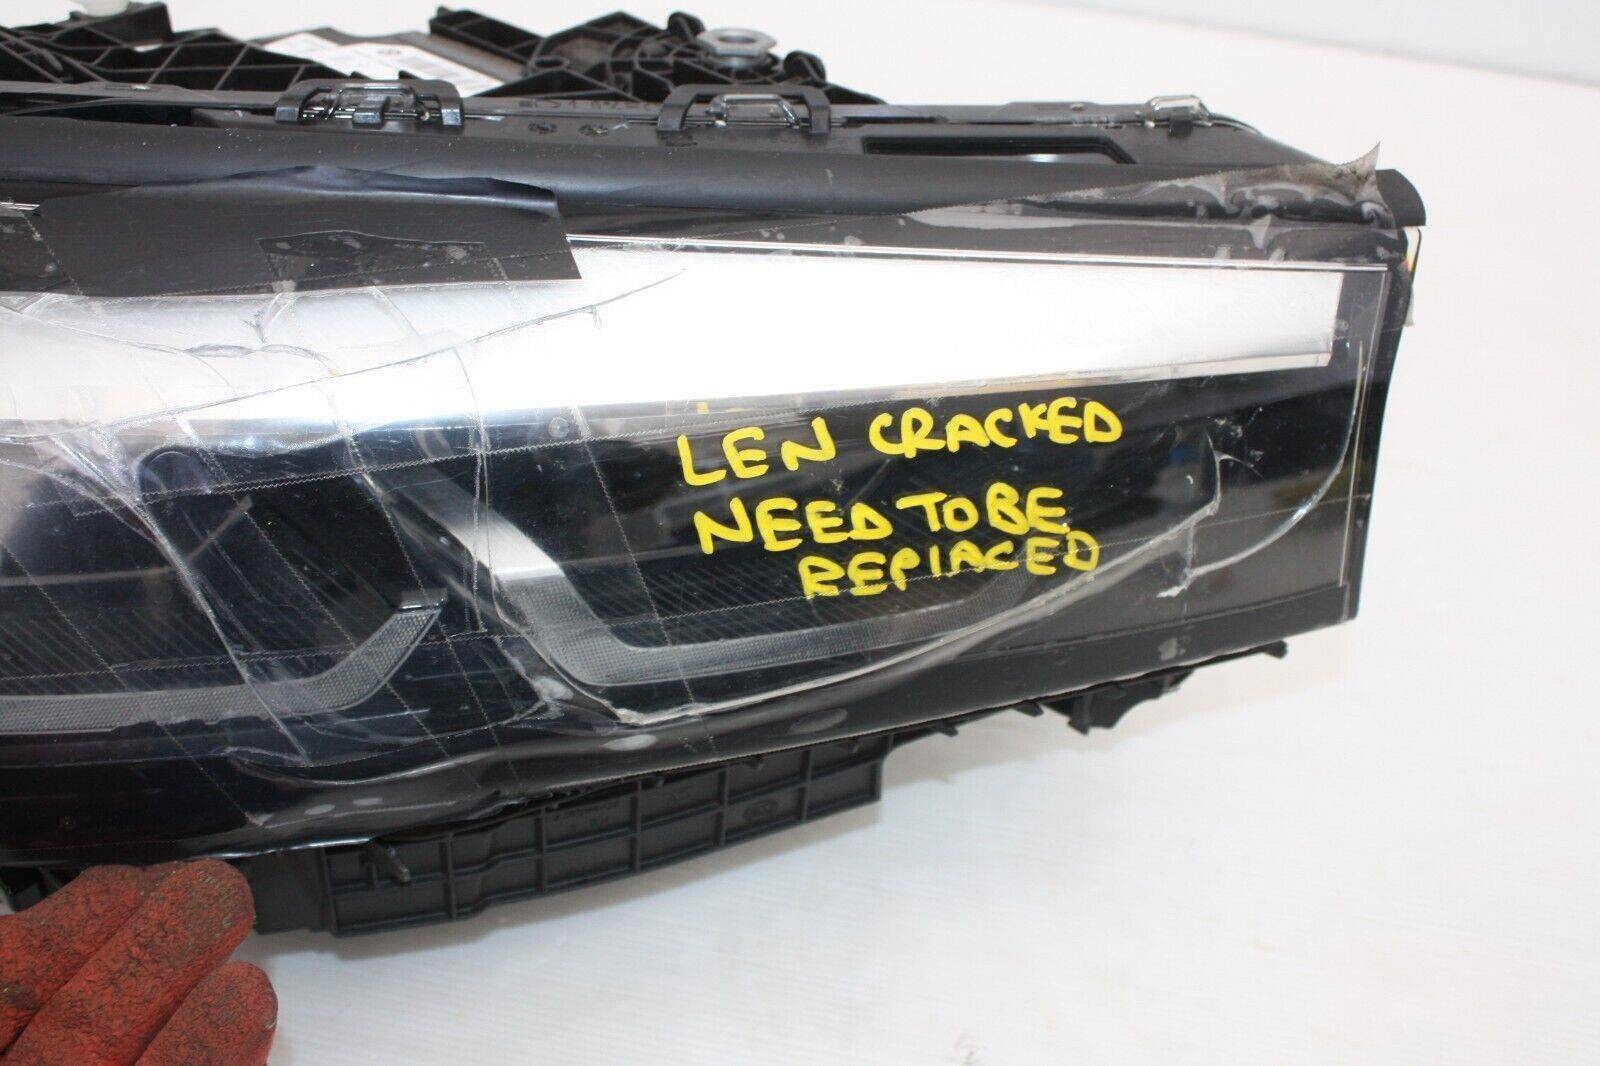 BMW-X5-X6-G05-G06-Right-Side-LED-Headlight-5A388C6-02-SEE-PICS-AS-ITS-DAMAGED-175444559307-2